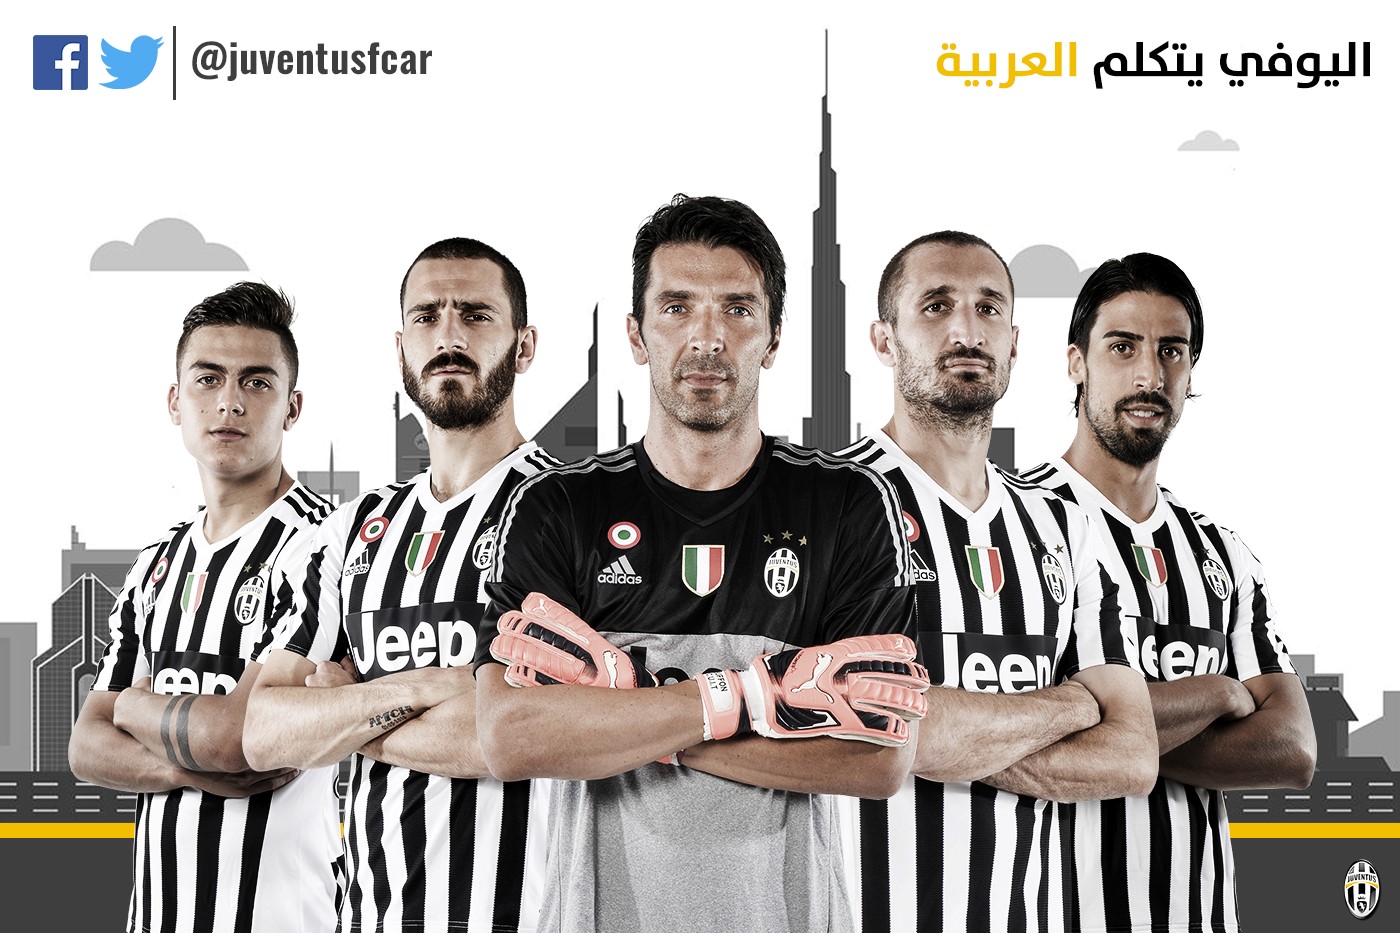 Juve link with KingFut to launch Arabic language service - Inside World Football